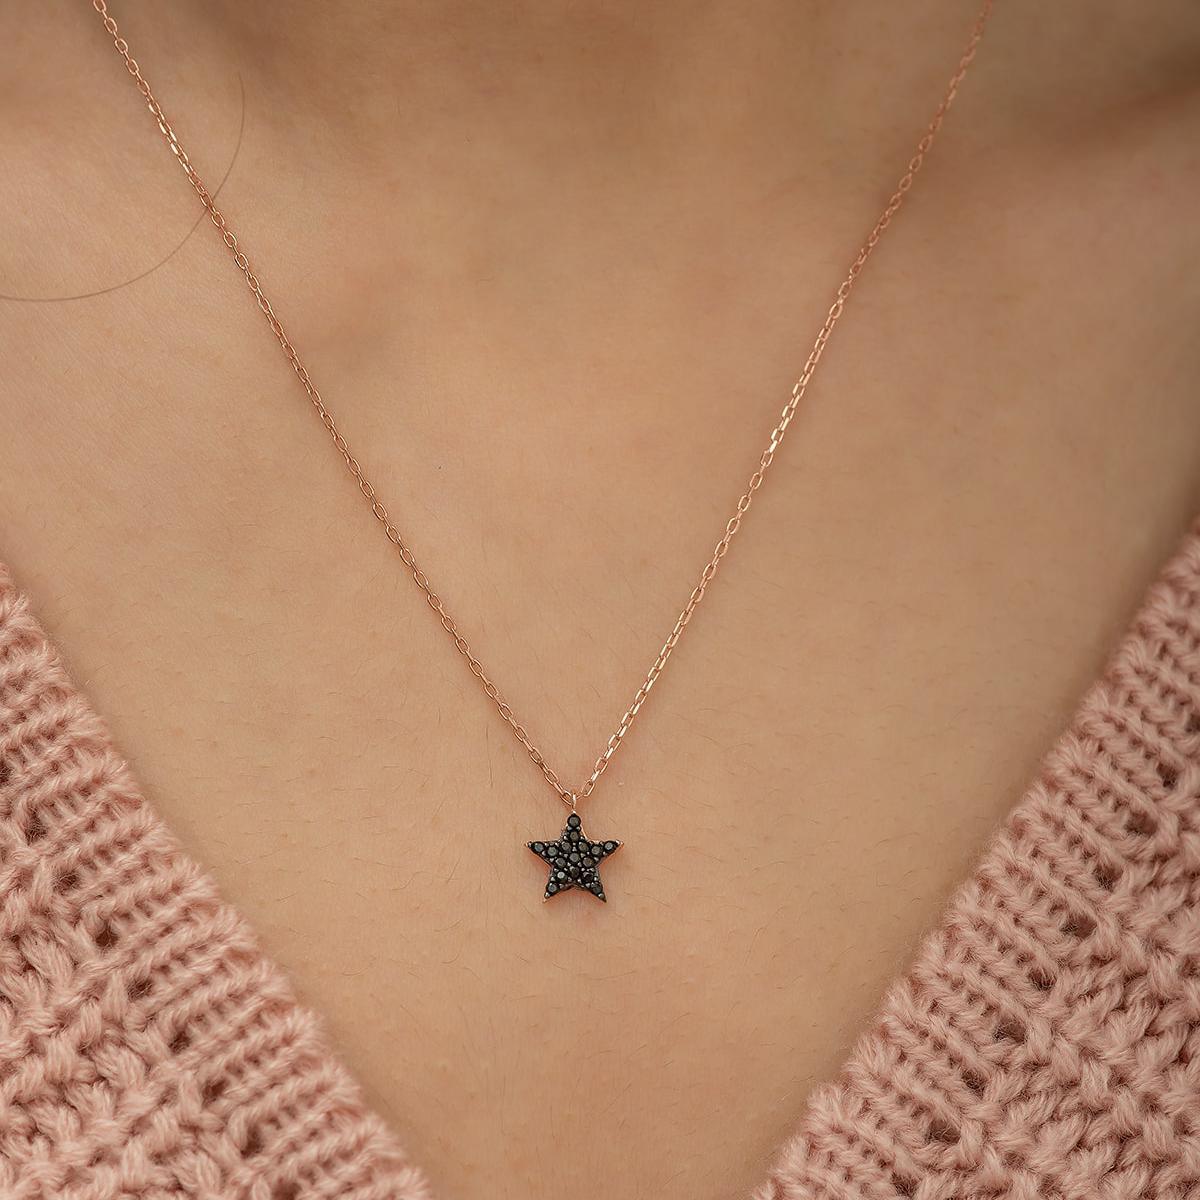 Black Zirconia Star Necklace • Star Sign Necklace • Star Necklace - Trending Silver Gifts